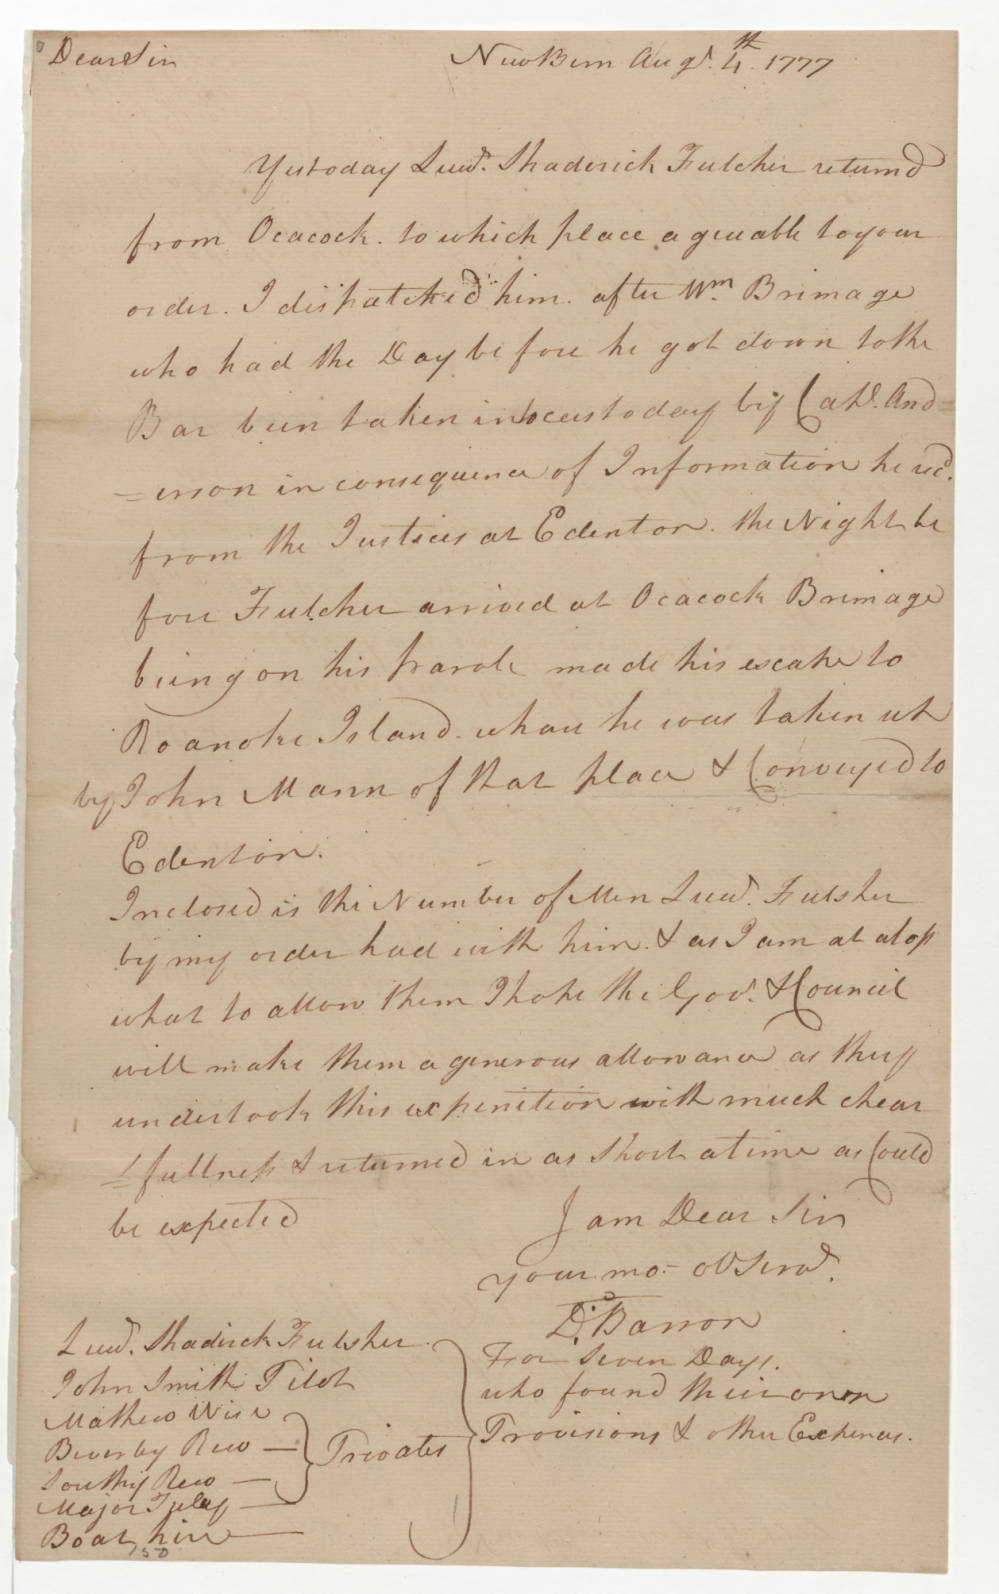 Letter from David Barron to Richard Caswell, 4 August 1777, page 1